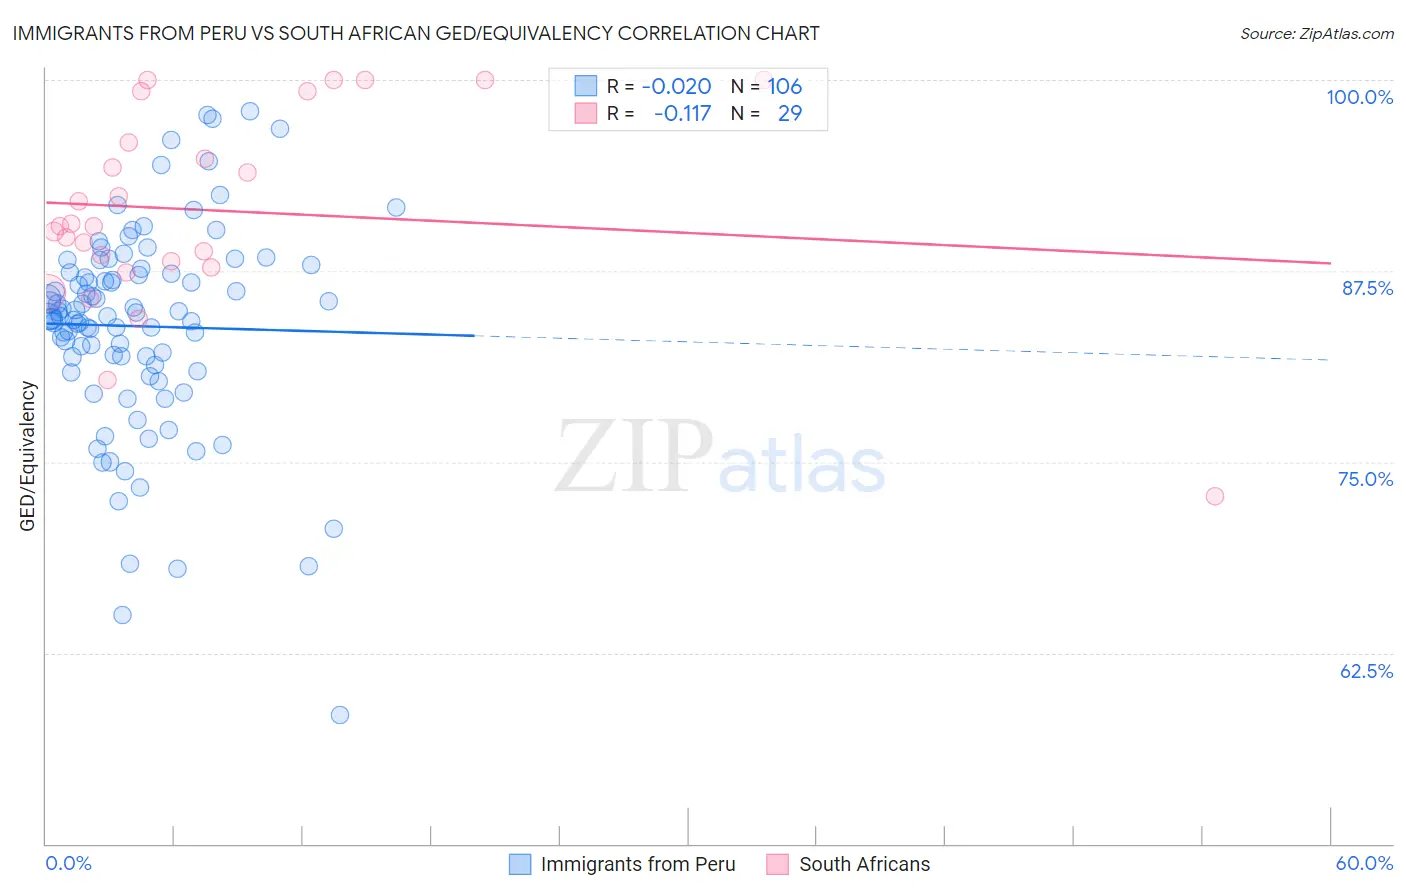 Immigrants from Peru vs South African GED/Equivalency